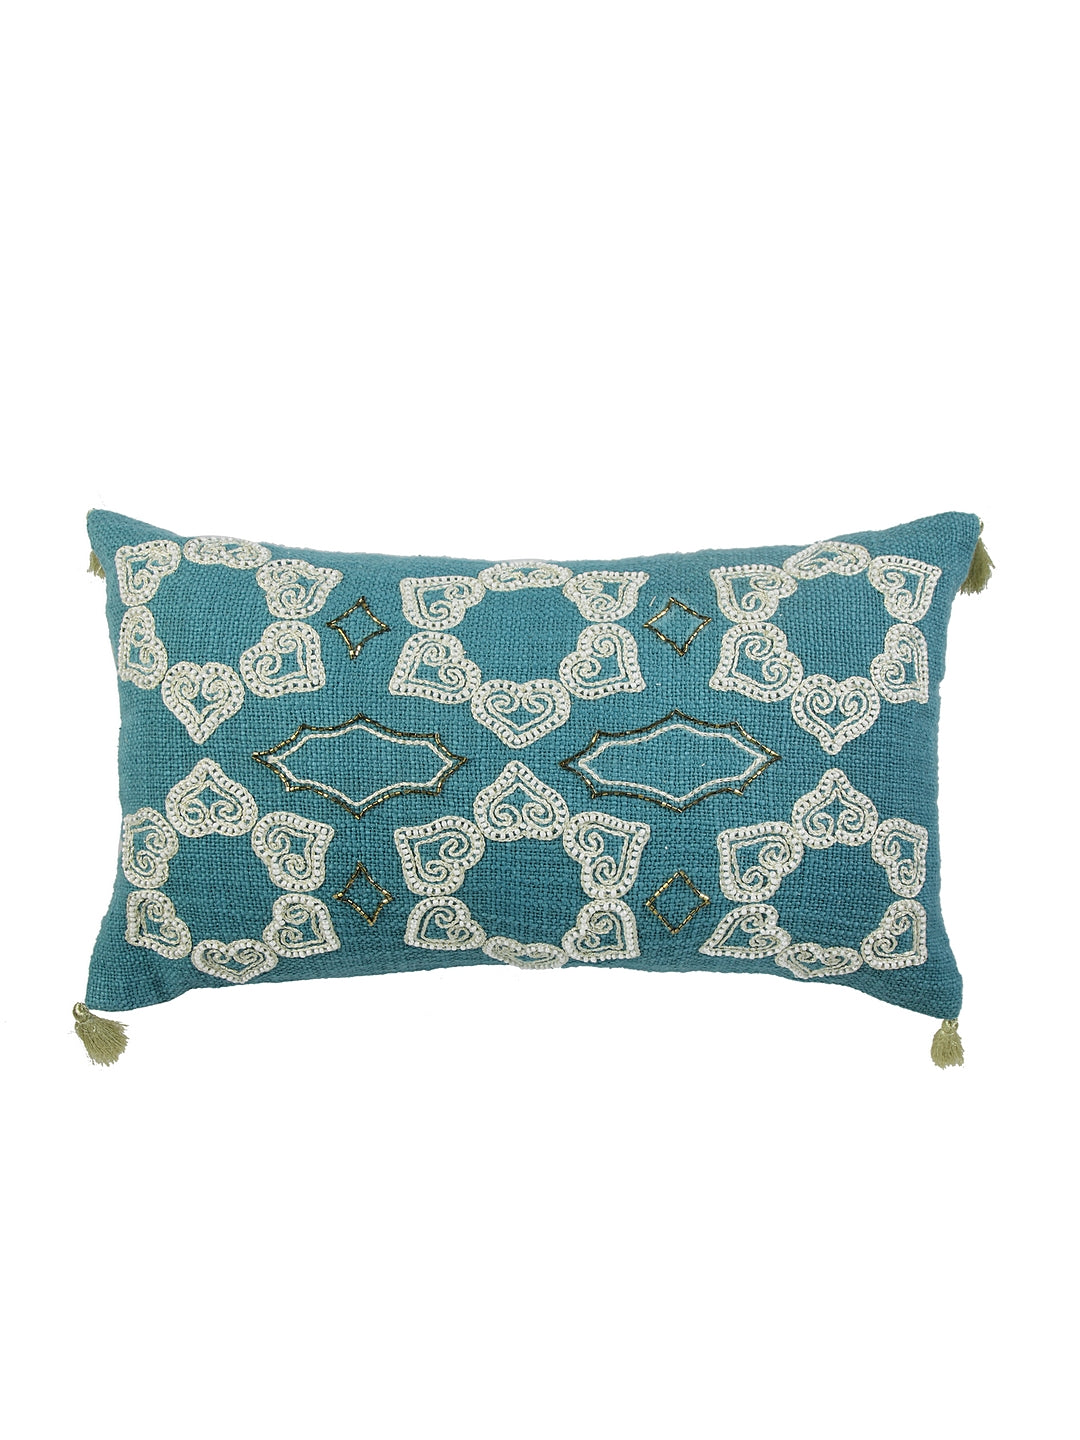 Royal Damask Cushion Cover with Filler 30x50cm